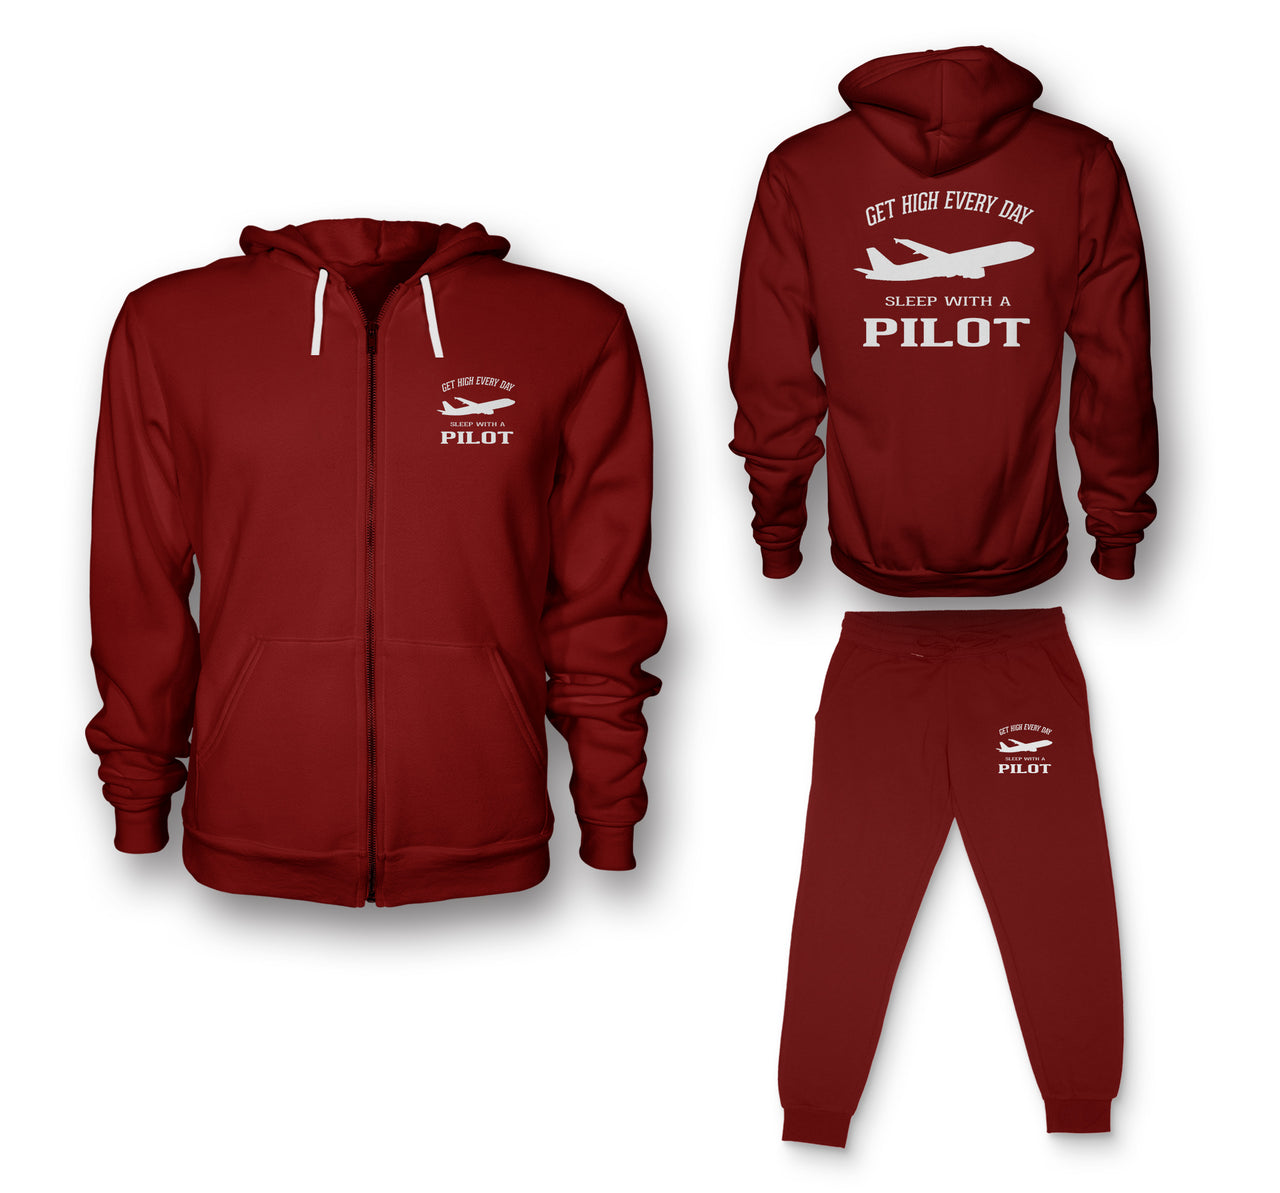 Get High Every Day Sleep With A Pilot Designed Zipped Hoodies & Sweatpants Set